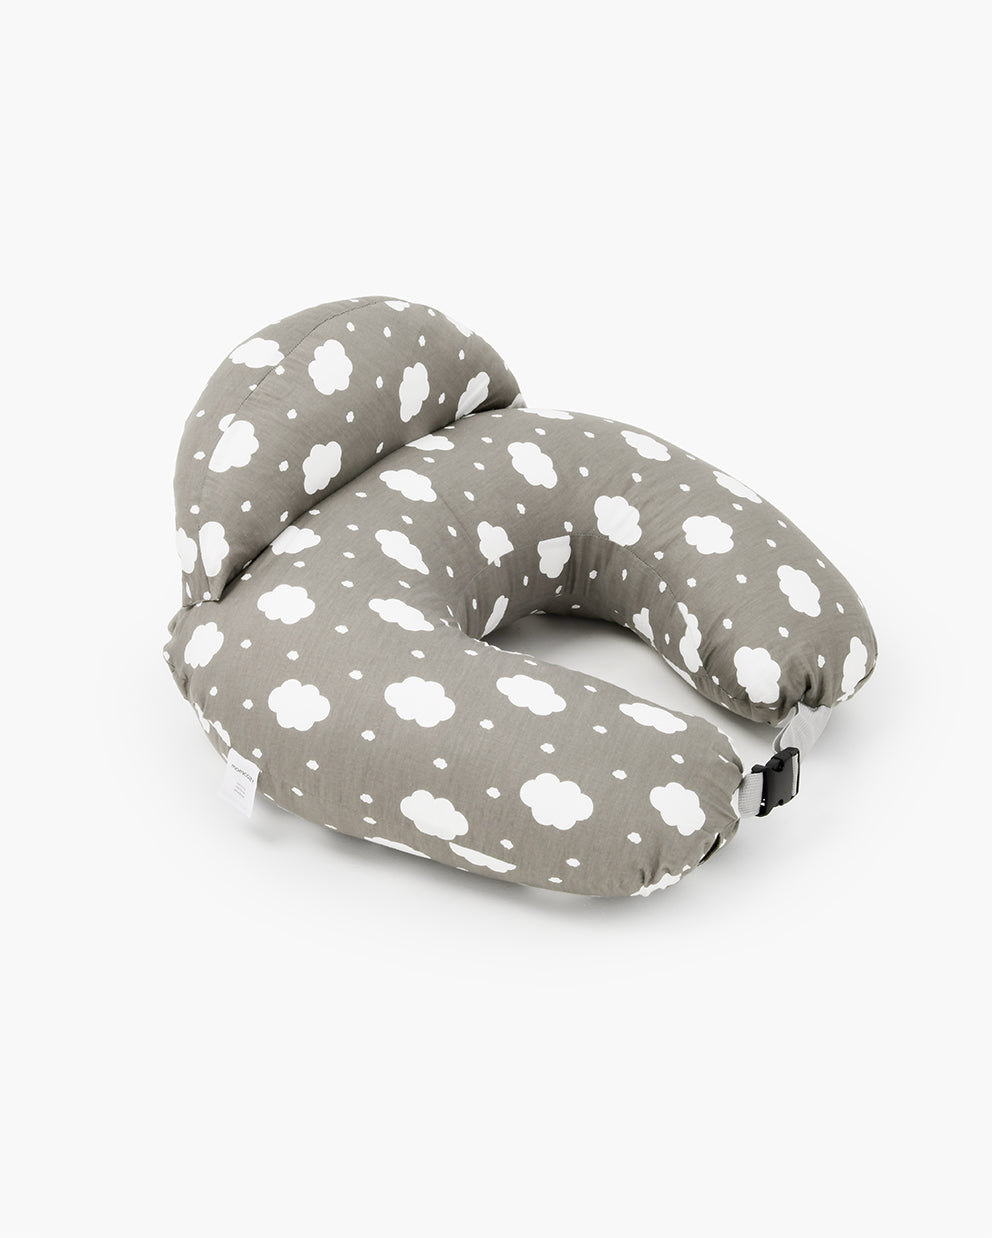 Multifunctional and Adjustable Nursing Pillow for Baby